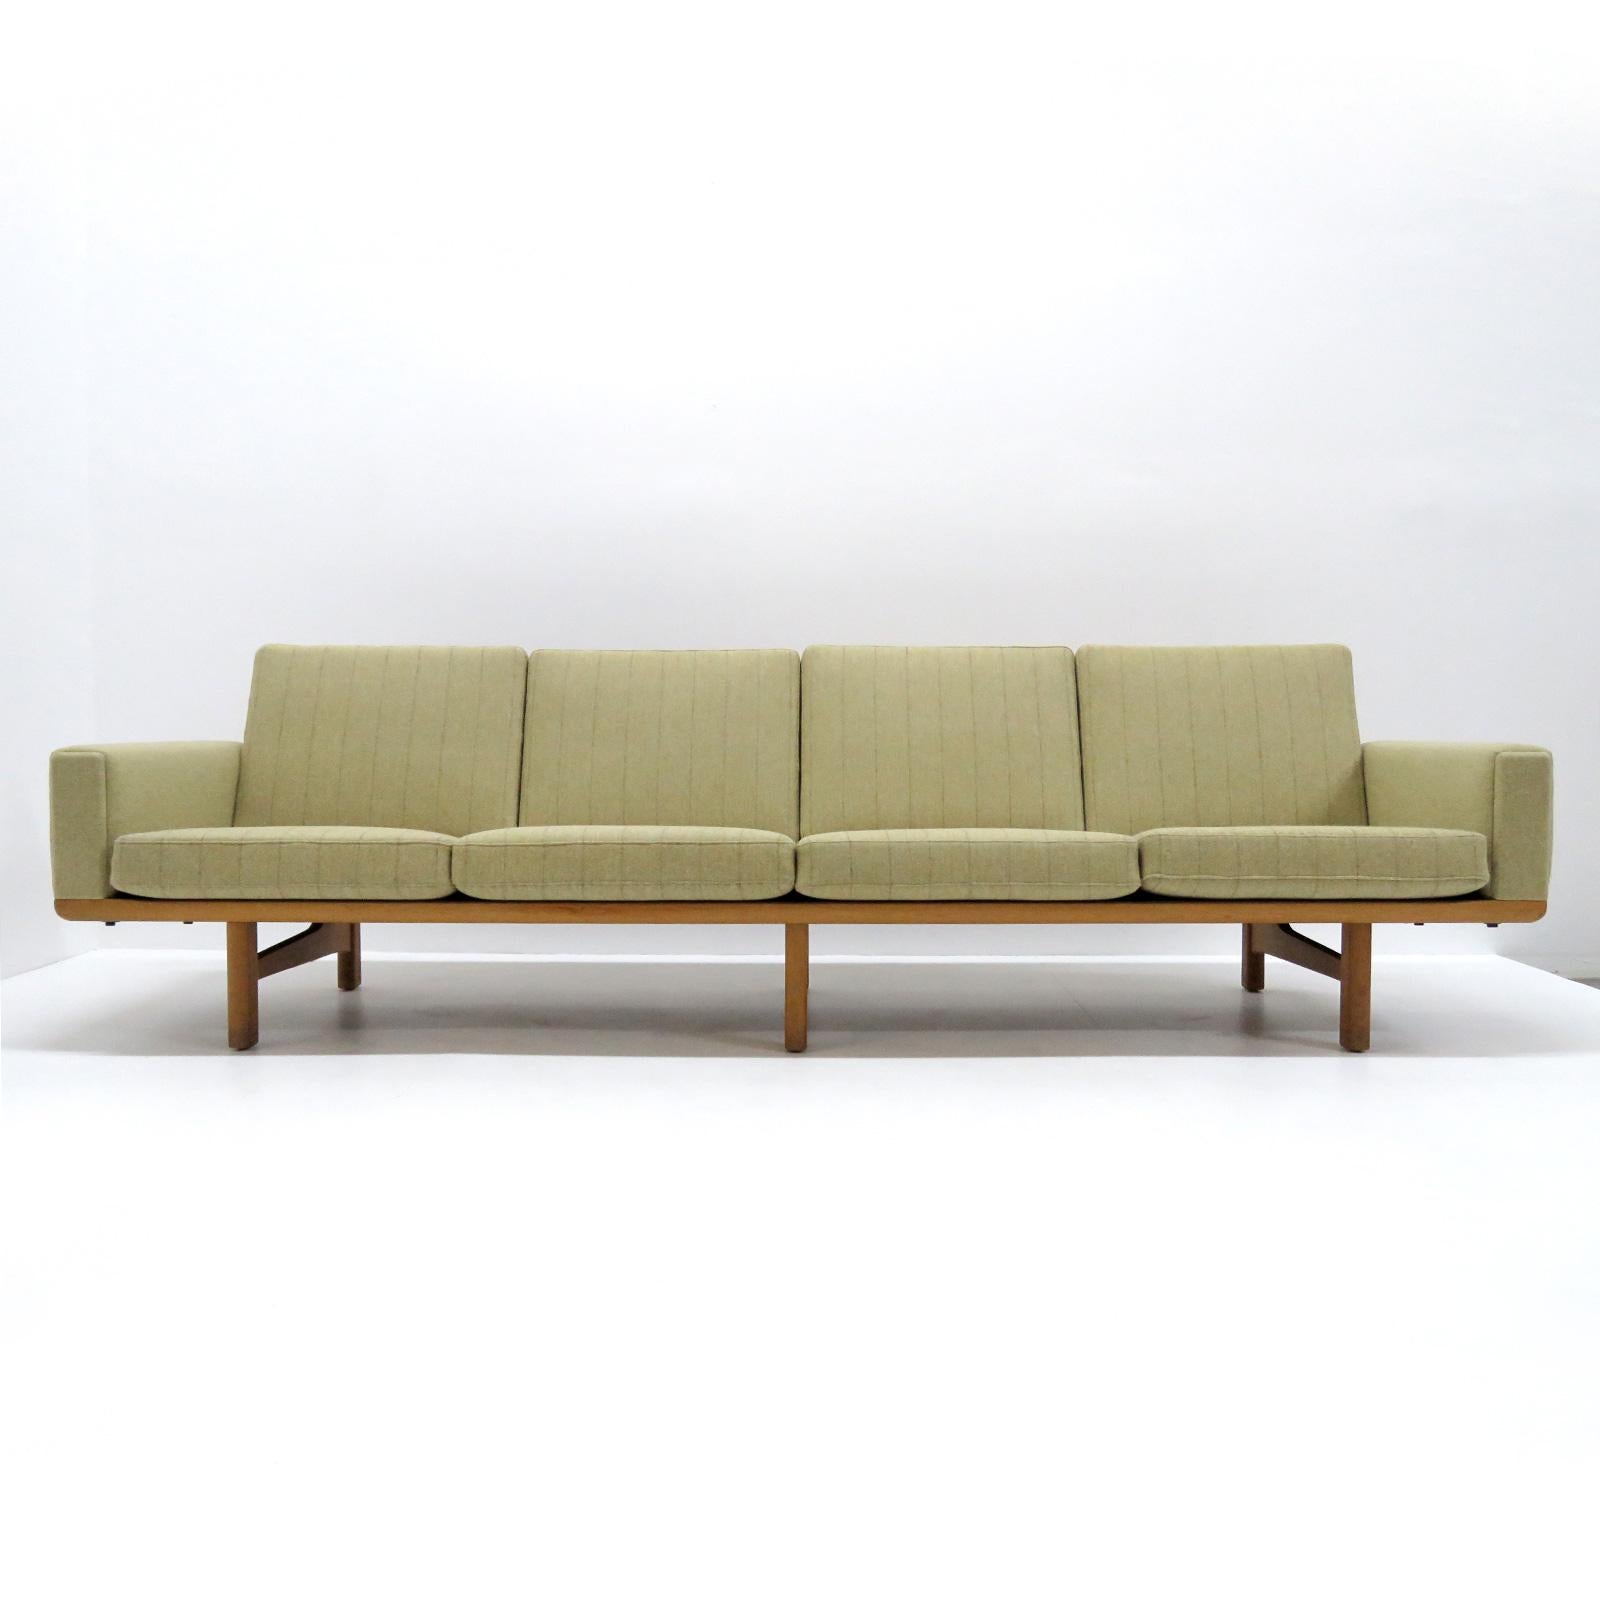 vintage 1950s Danish four-seat sofa, model GE236/4 designed by Hans J. Wegner for GETAMA, solid oak frame with nice patina and original cushions later reupholstered with light yellow-ish wool fabric with subtile stripes on the cushions, marked.